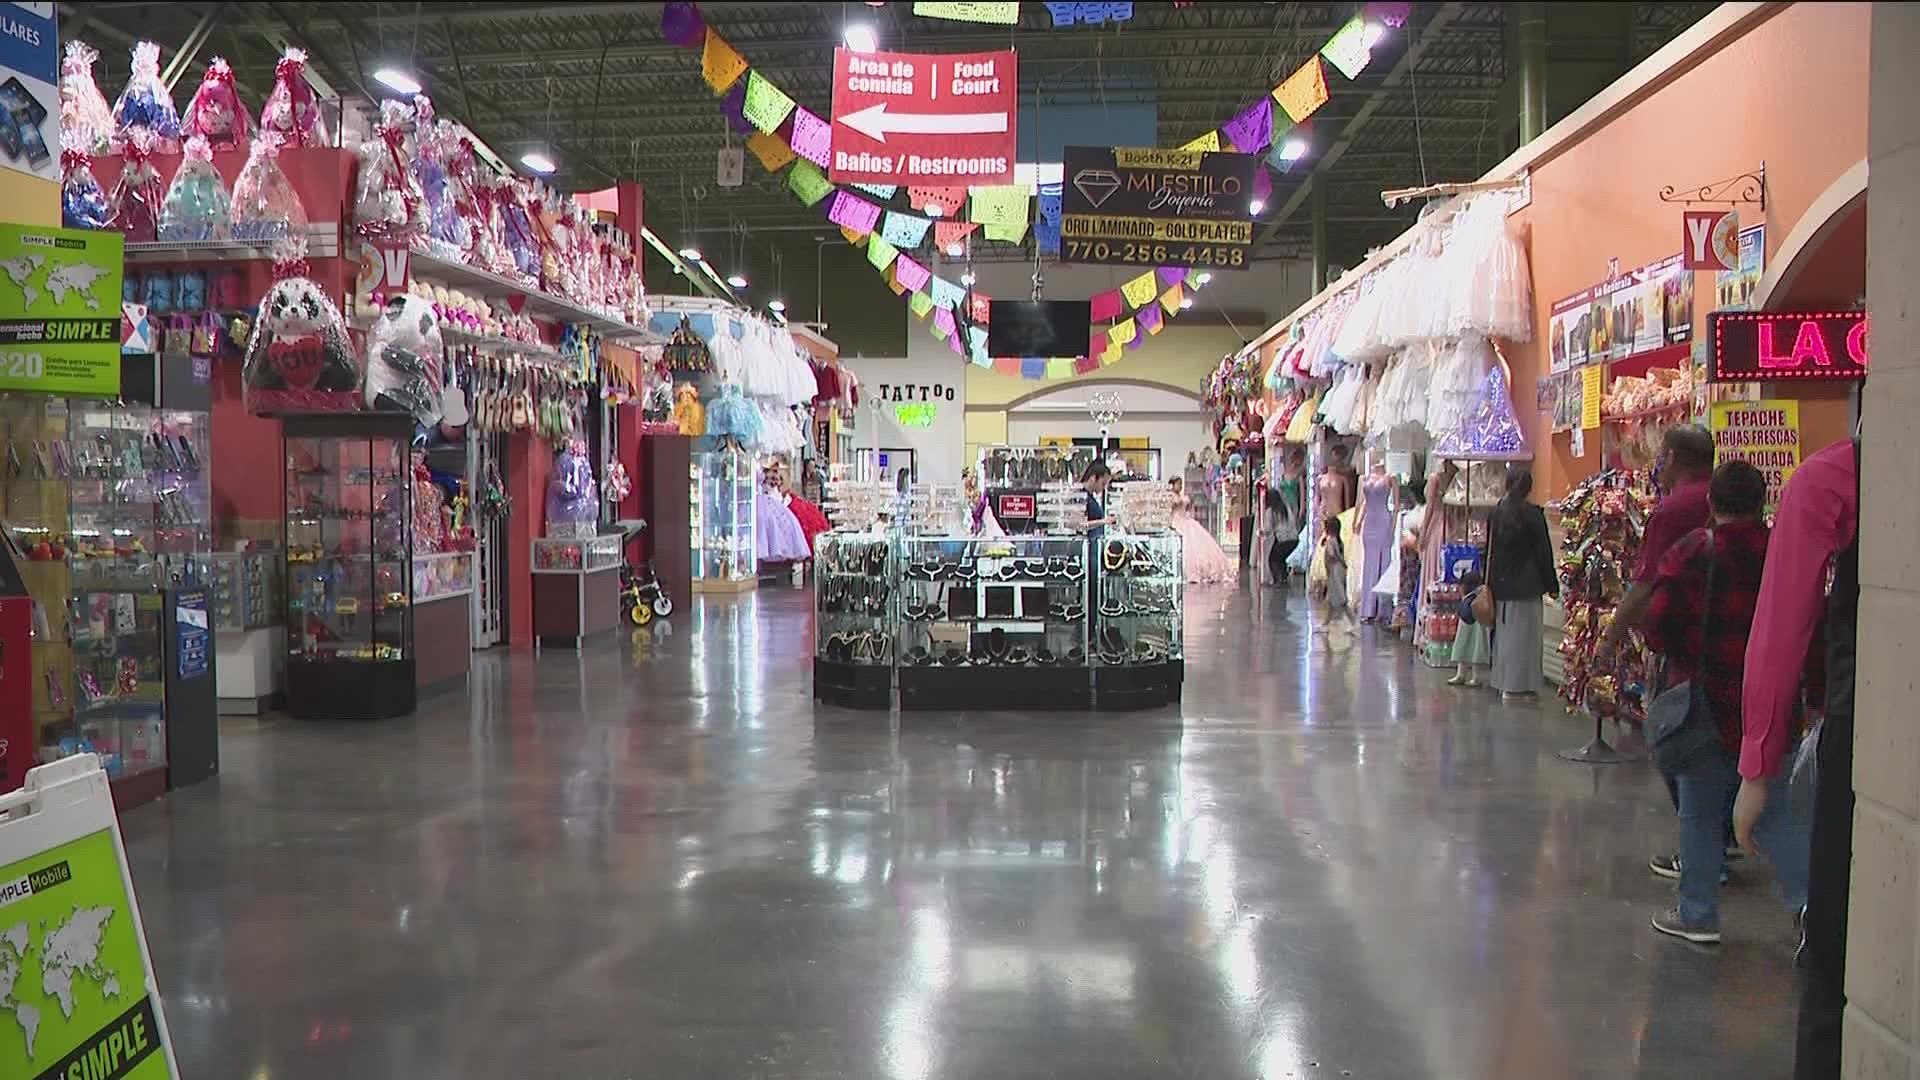 Plaza Fiesta recently changed ownership, worrying some tenants and shoppers about it potentially closing.